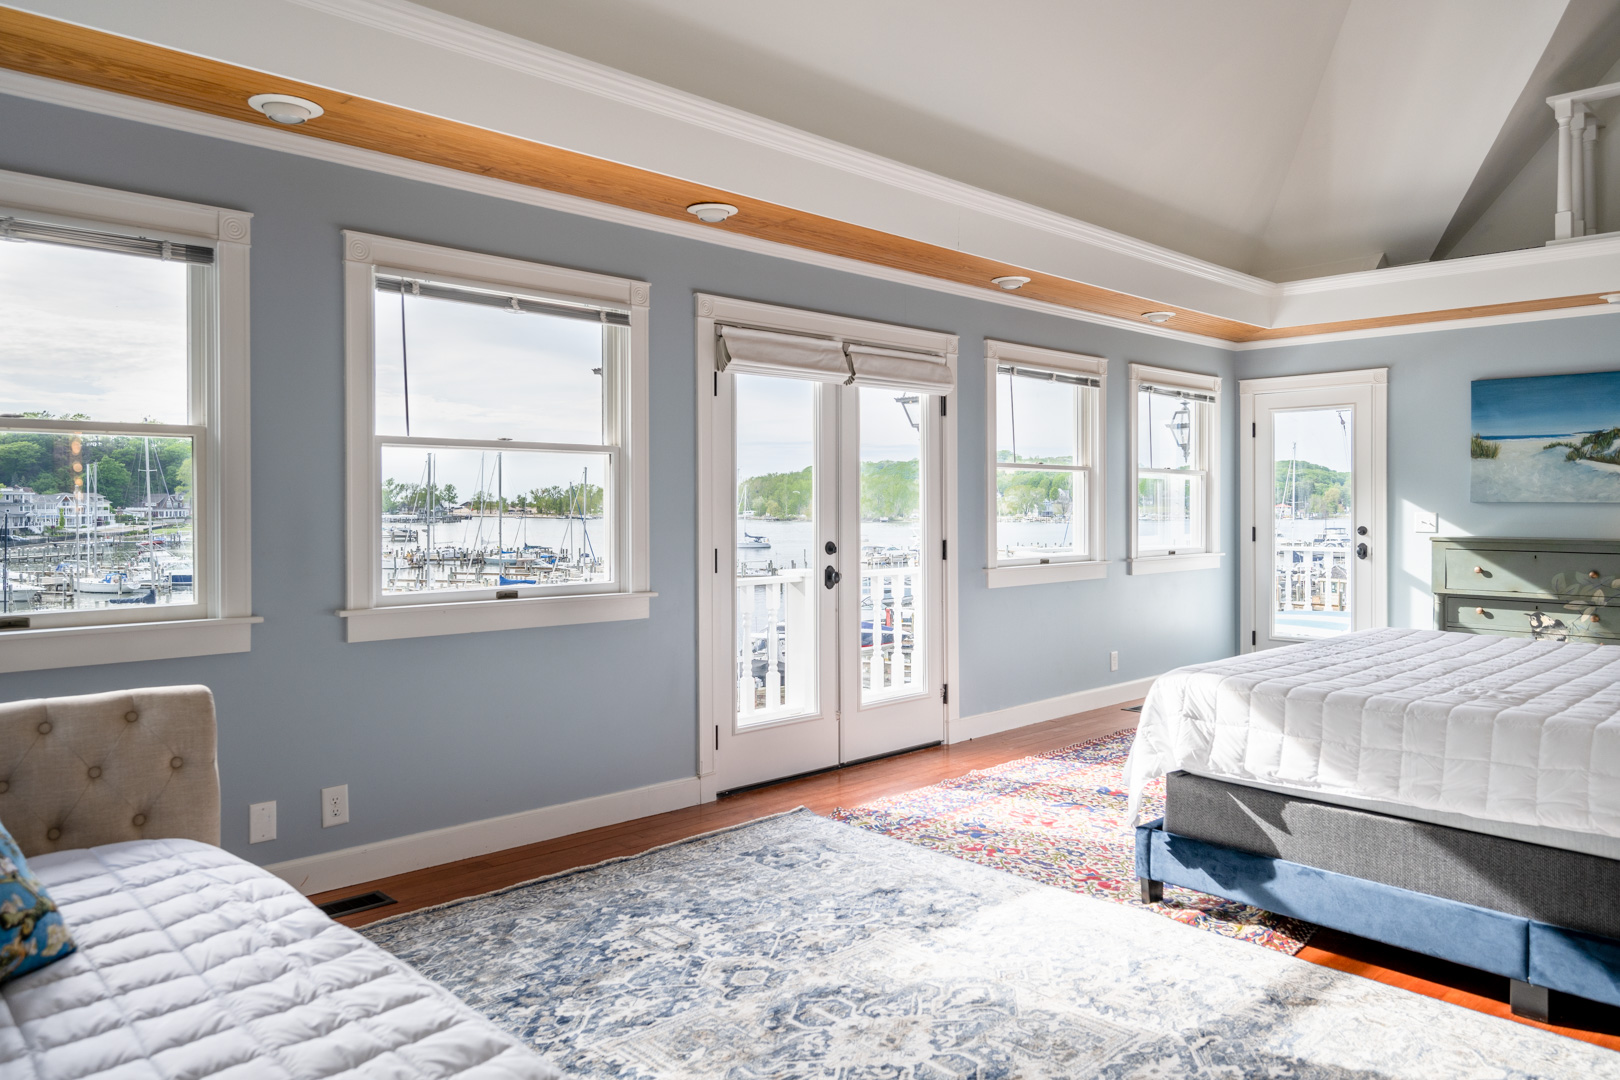 Step out the french doors to your own private deck and enjoy your morning coffee while watching the boats travel to and from Lake Michigan along the channel.